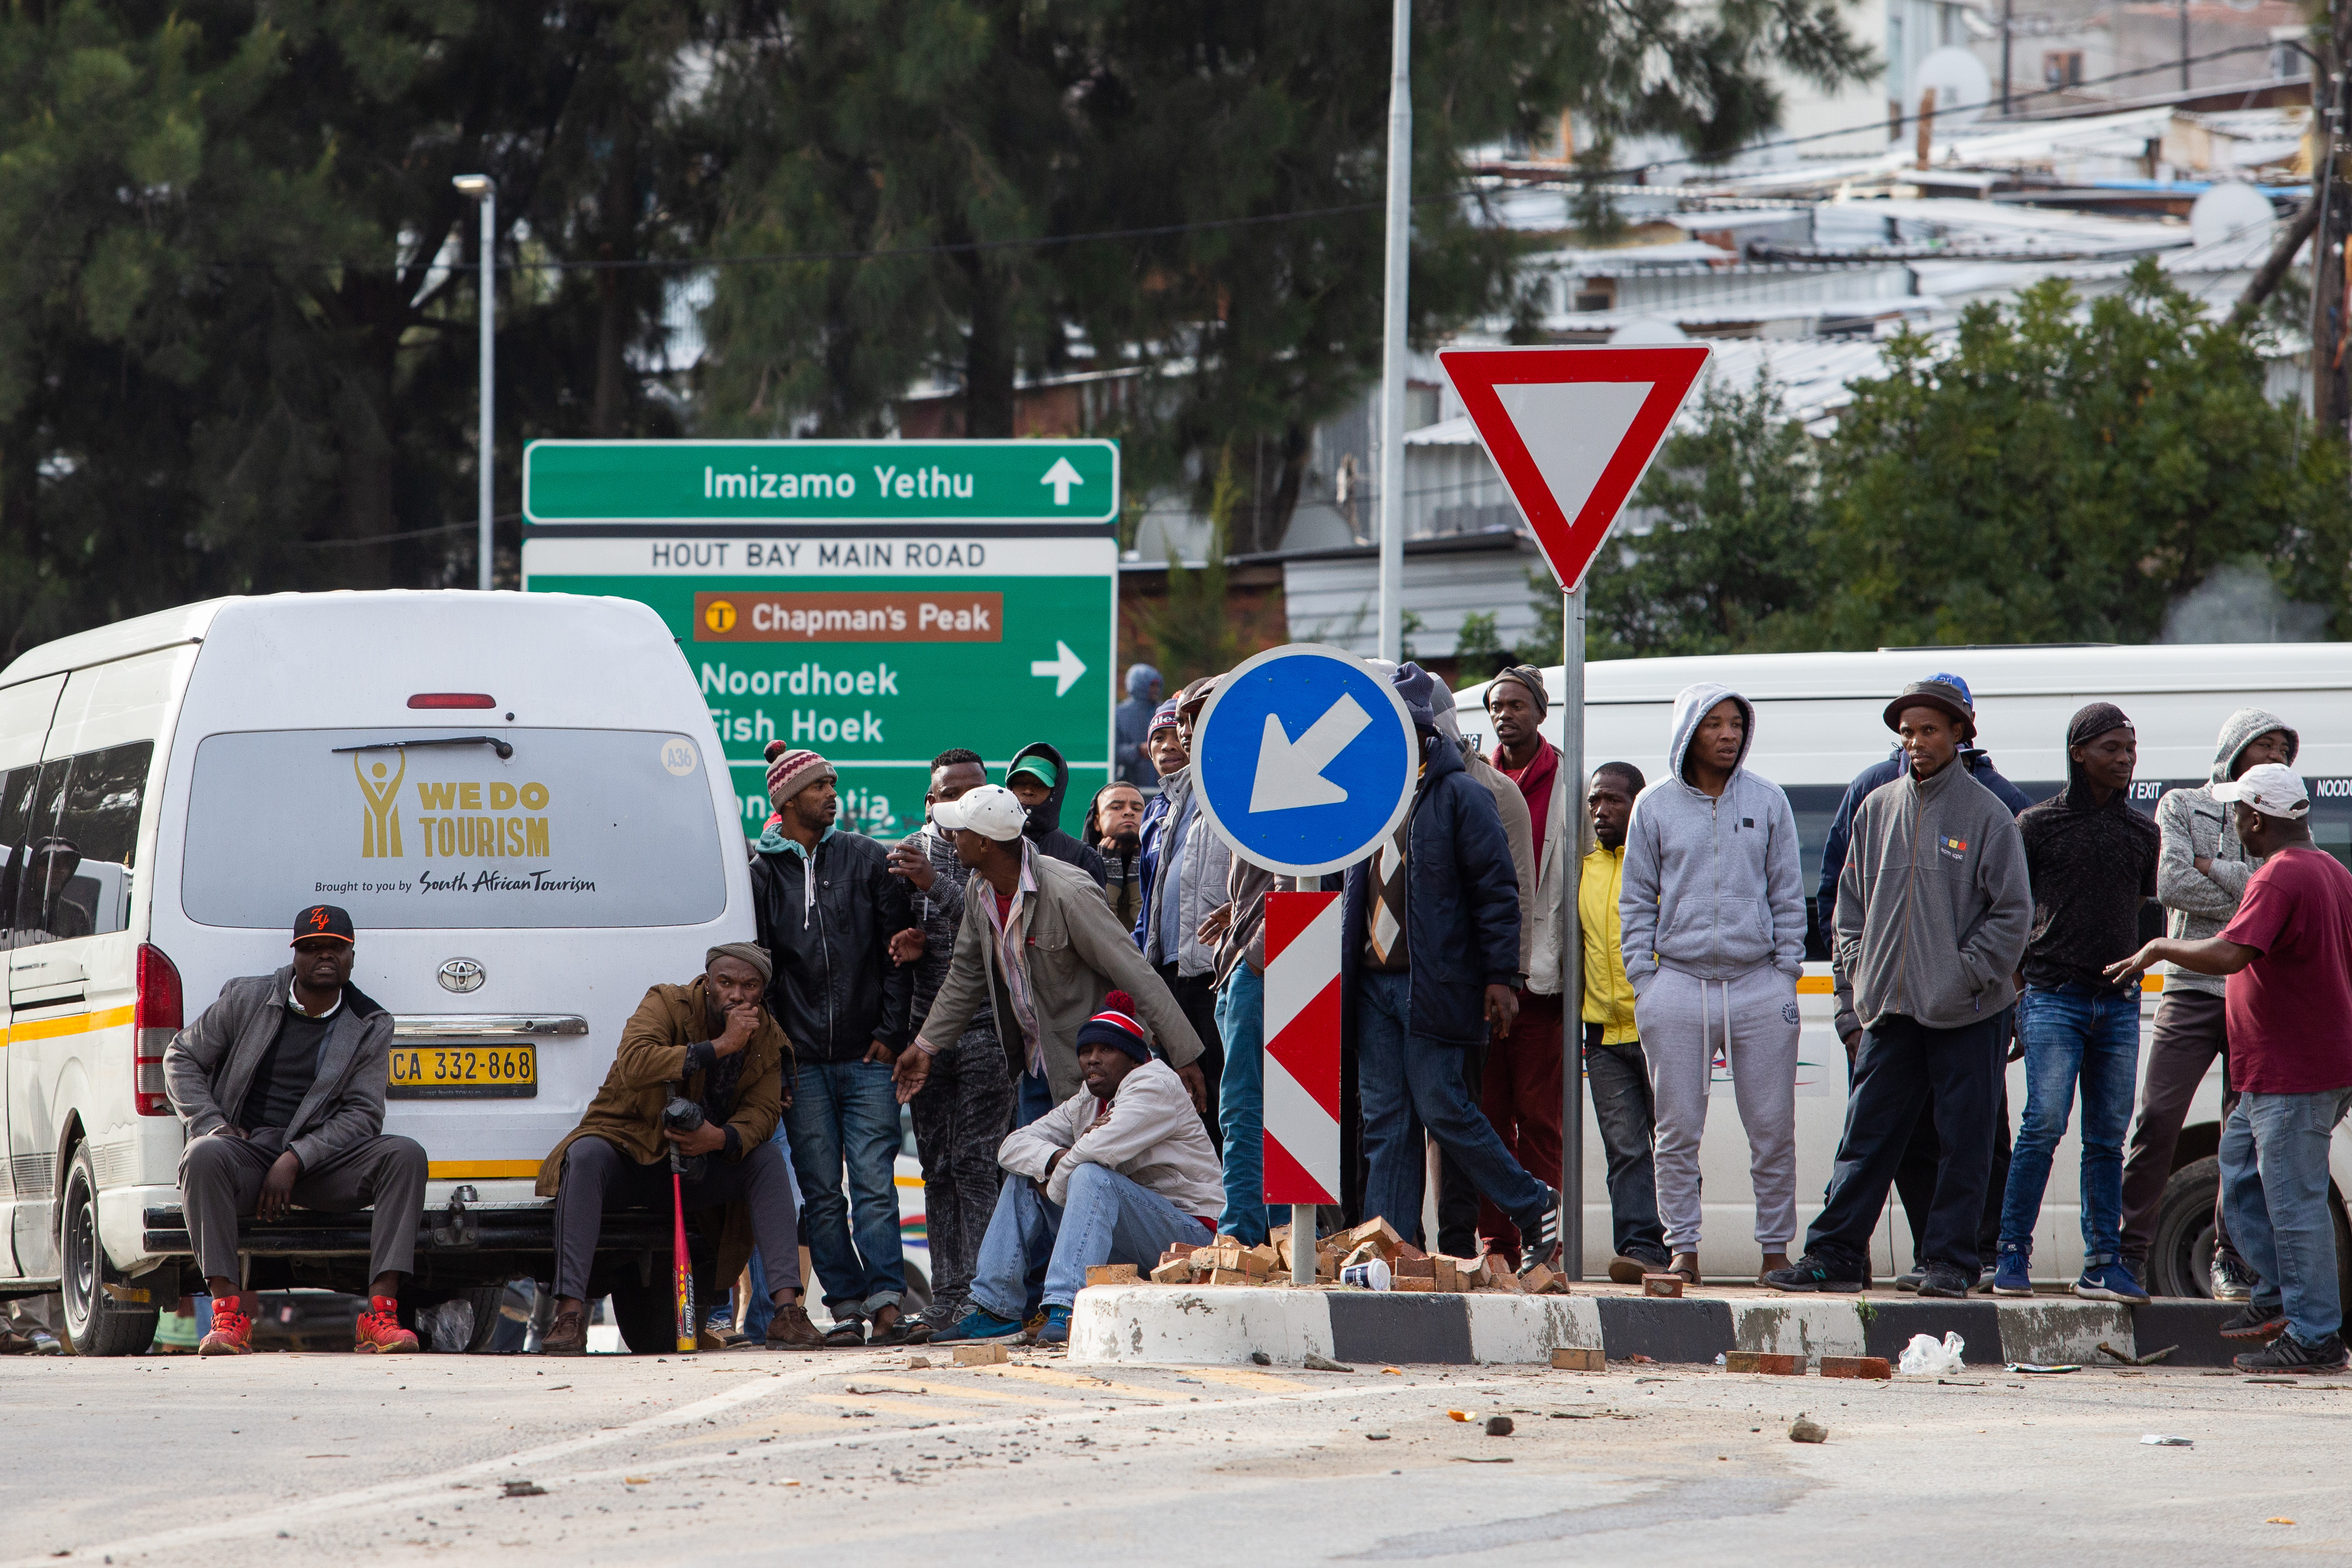 Hout Bay roads blocked in taxi |